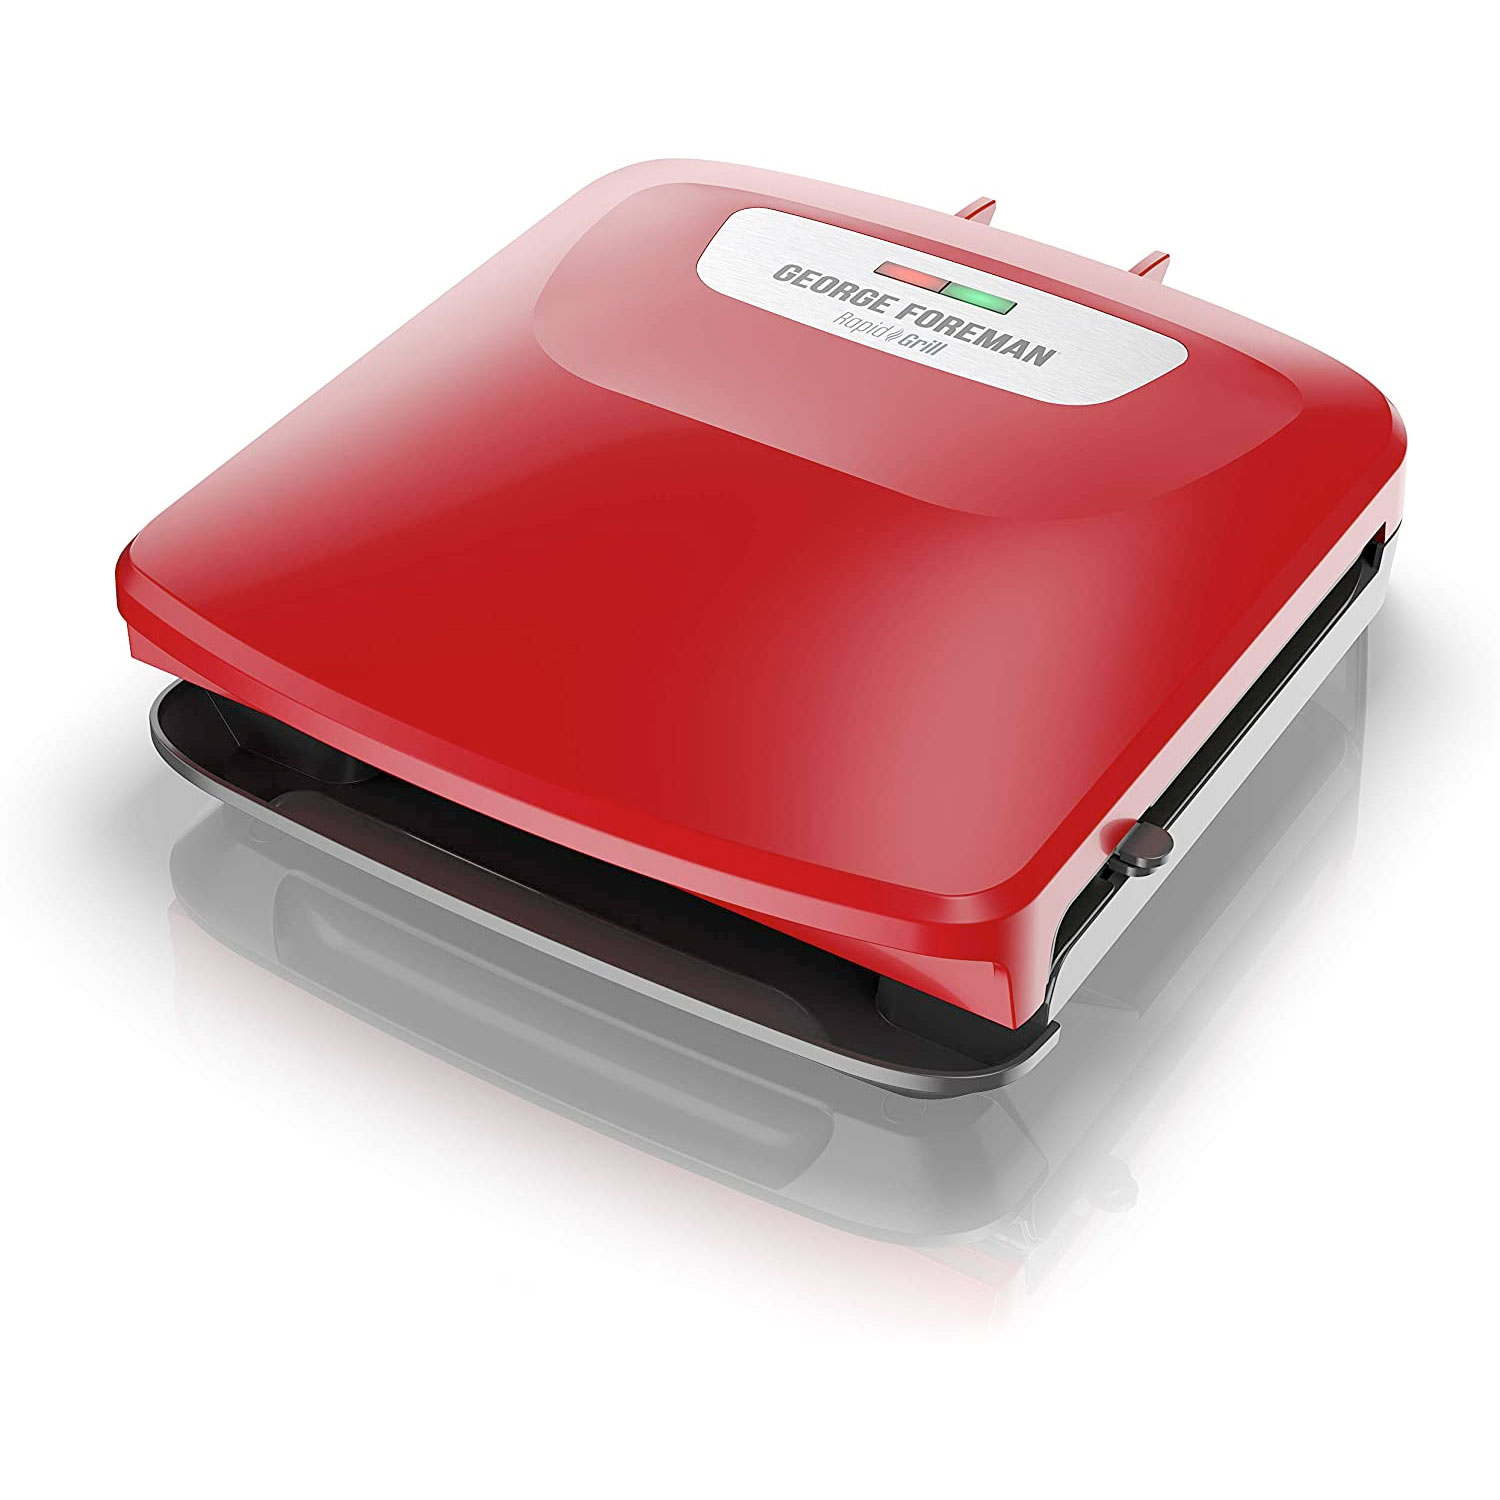 Amazon：George Foreman 4 Serving Electric Grill and Panini Press只賣$24